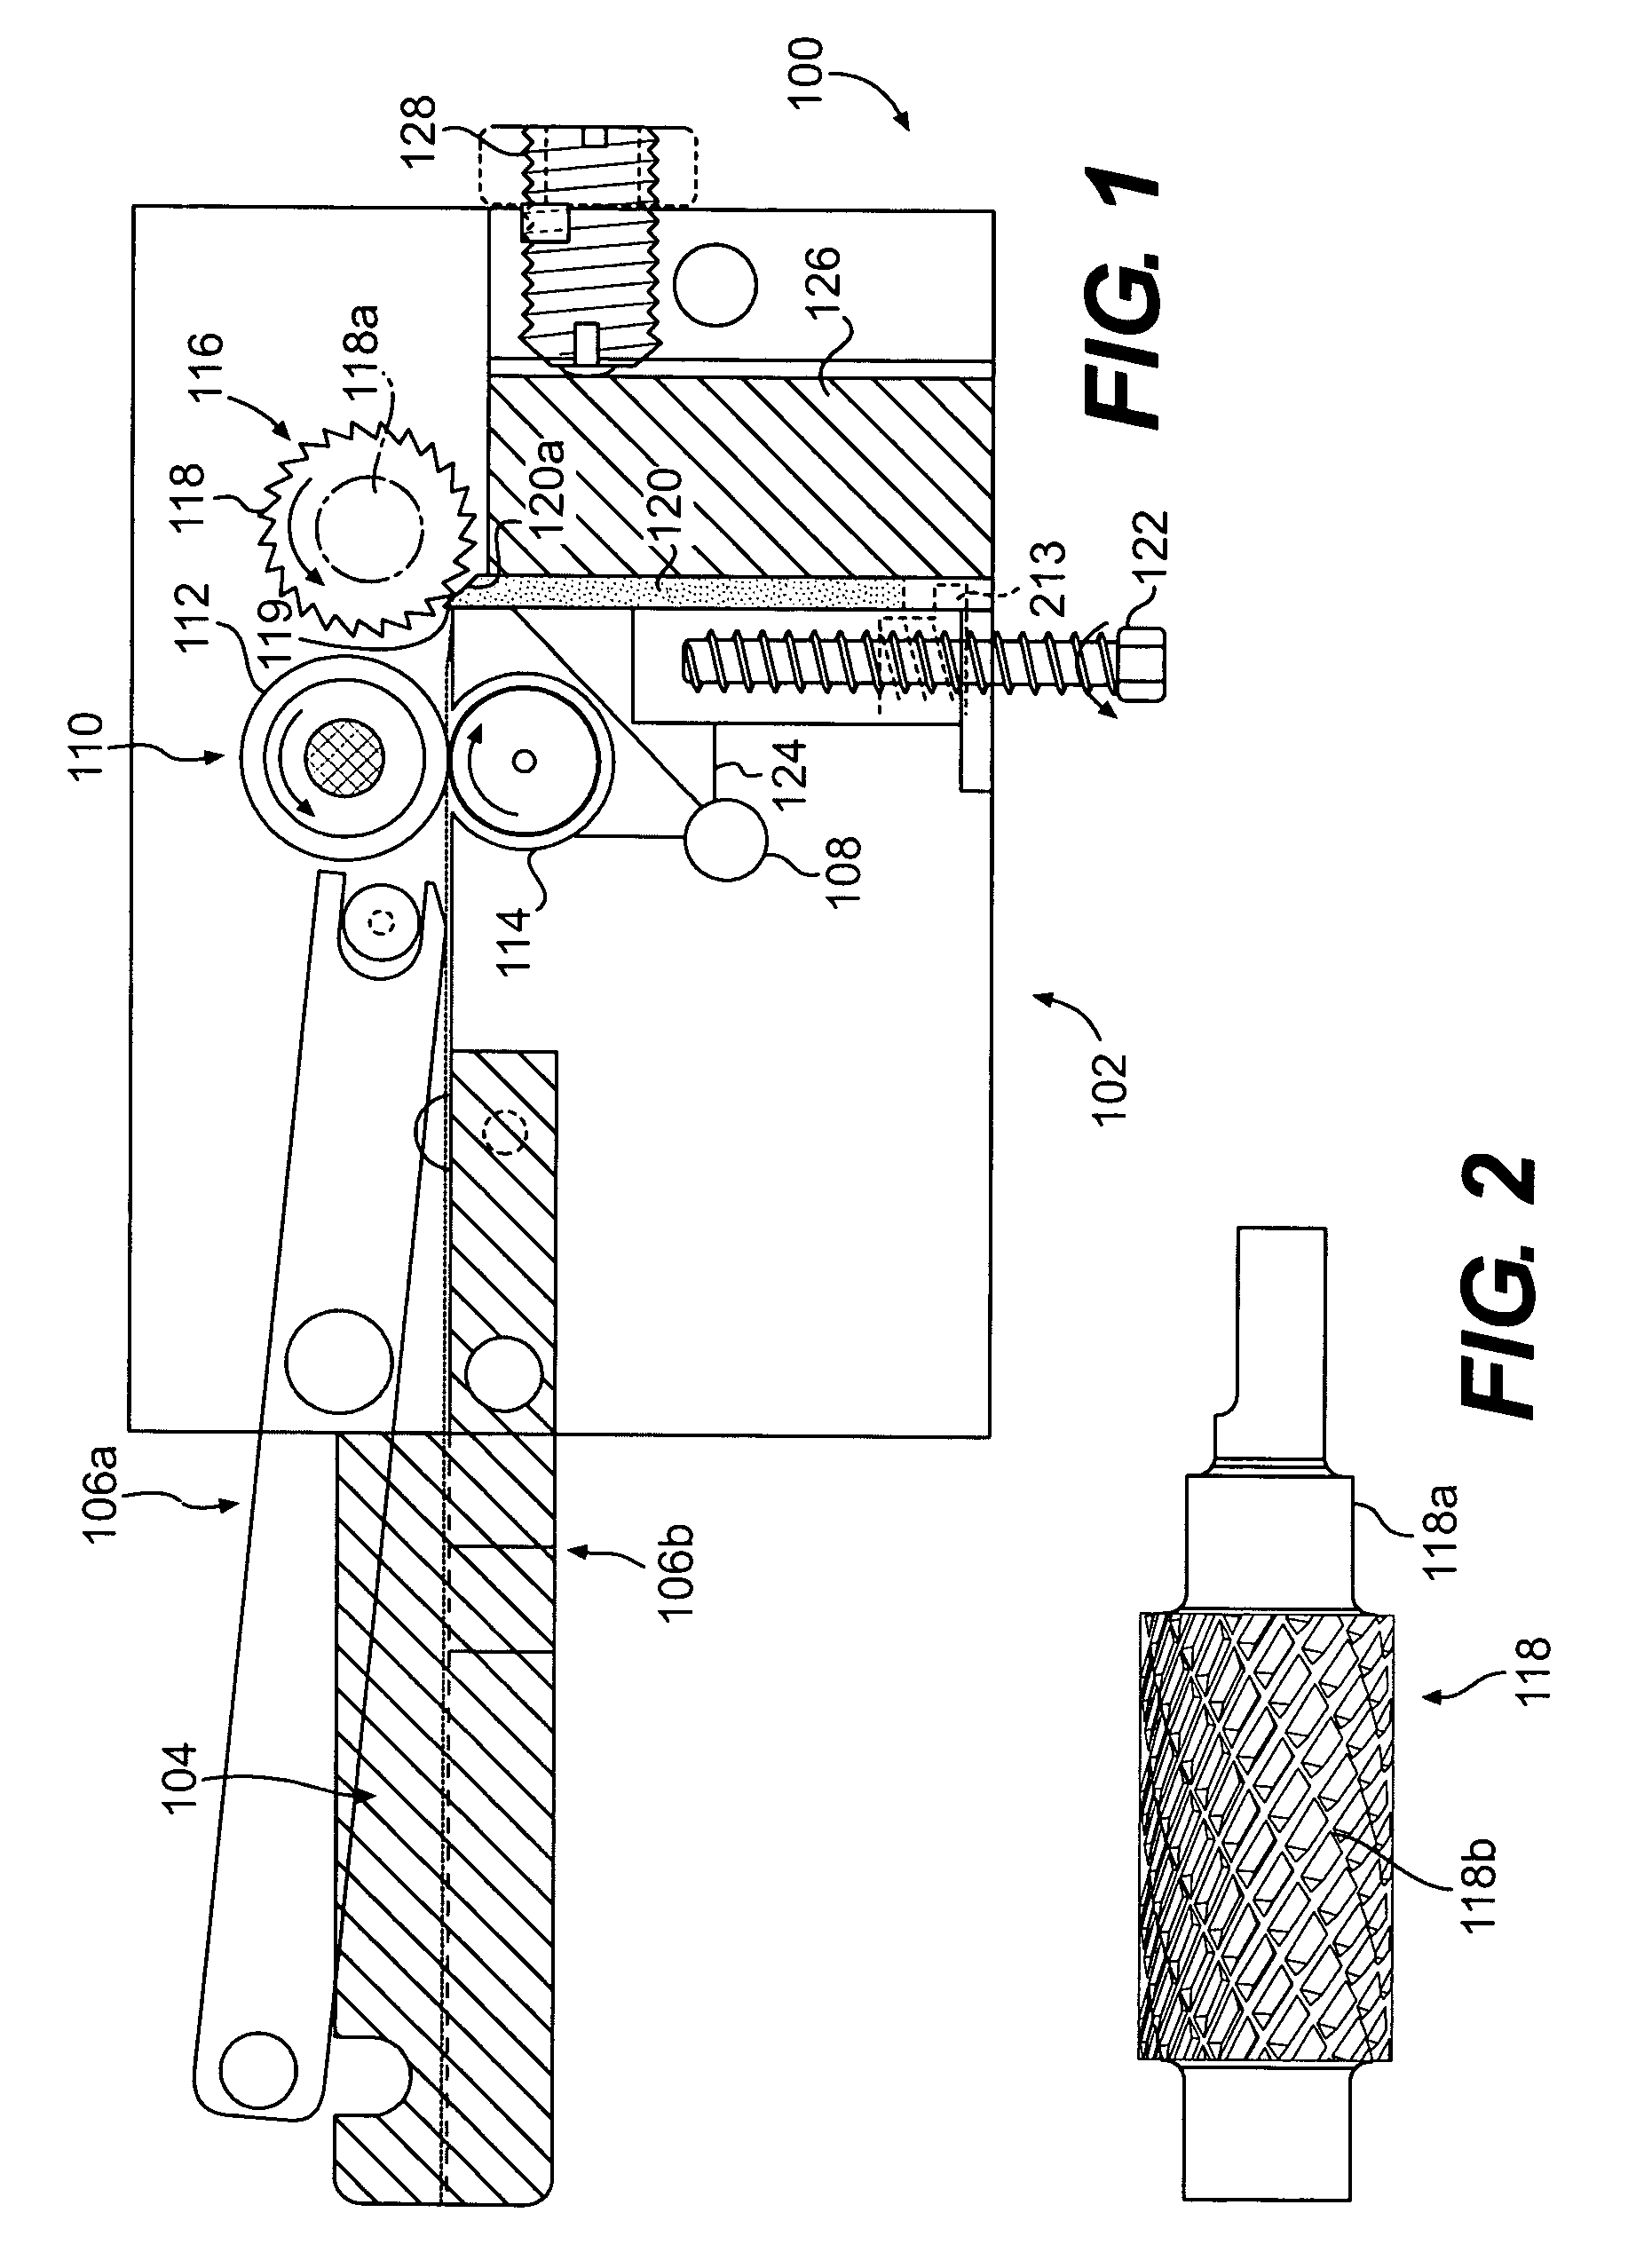 Self-healing cutting apparatus and other self-healing machinery